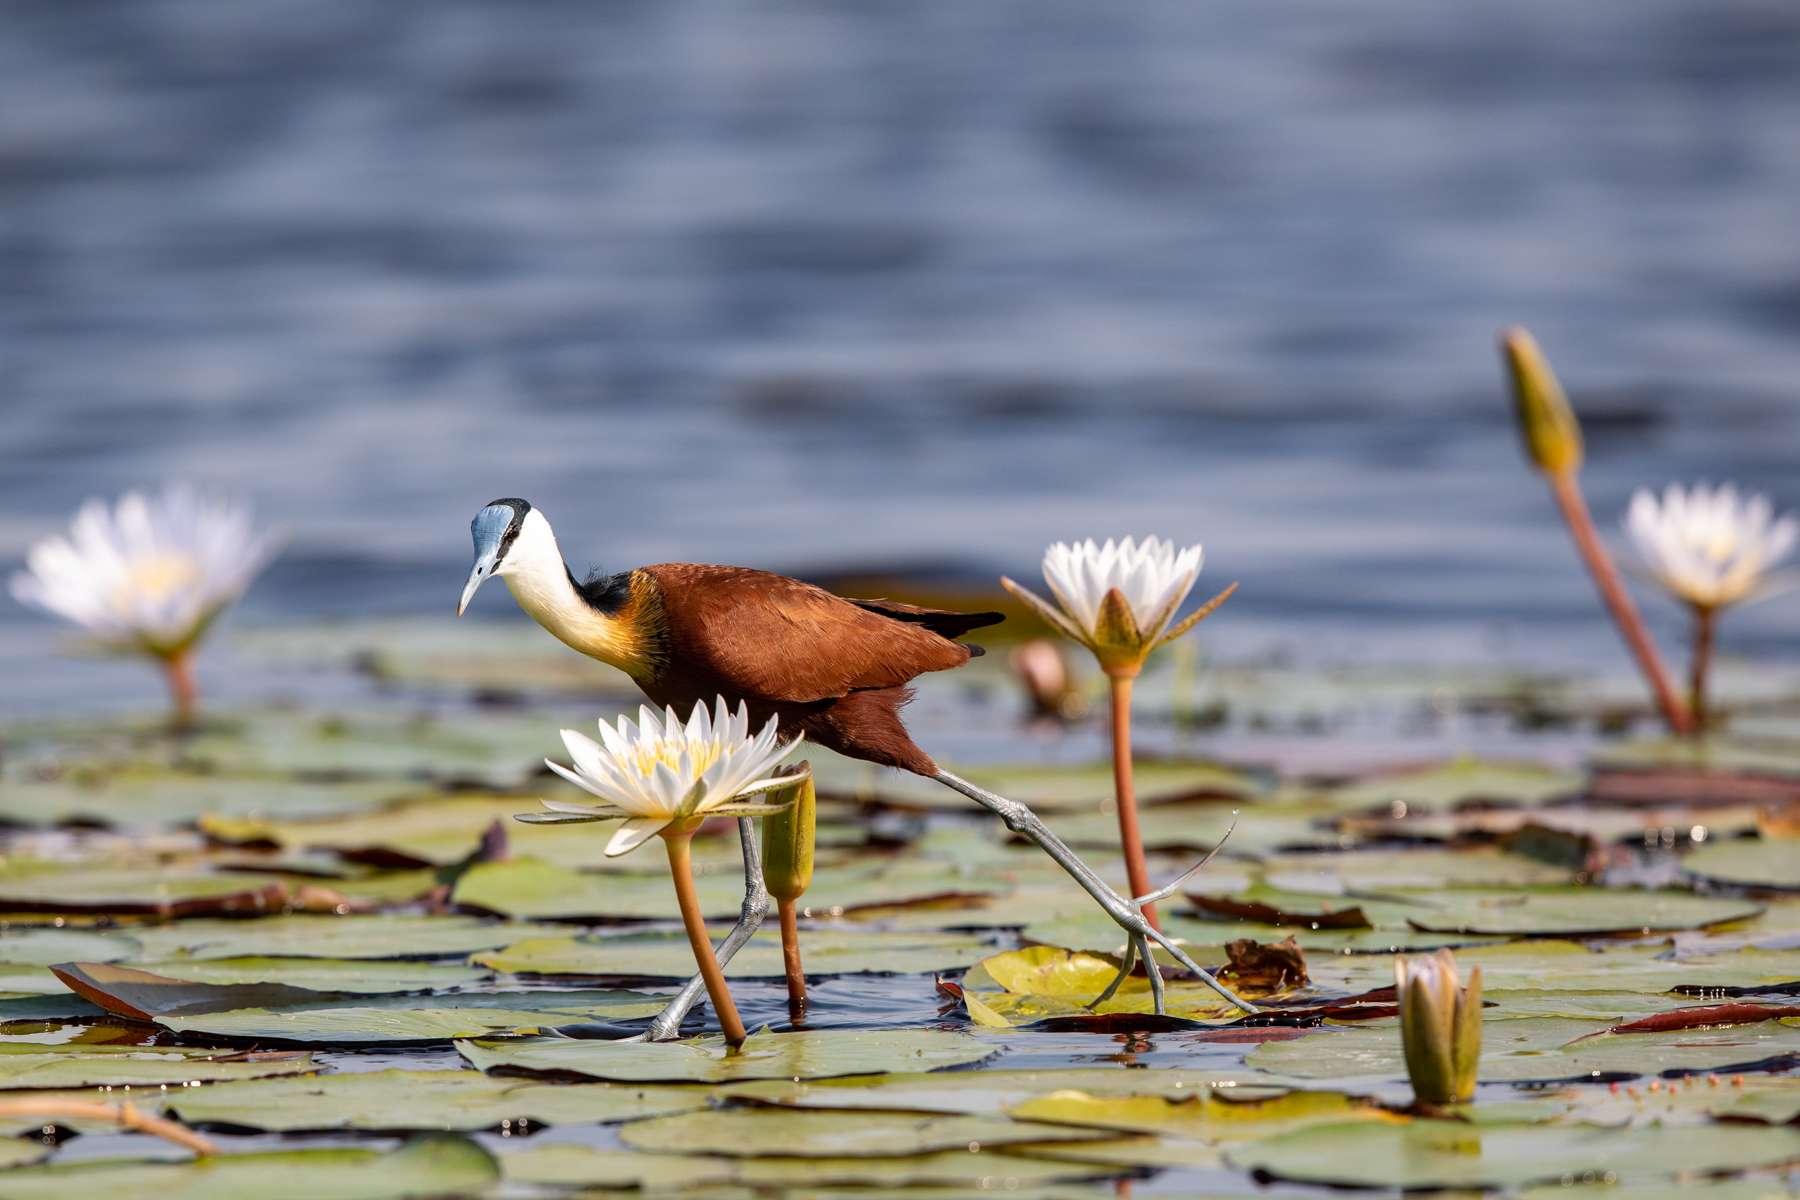 The African Jacana uses its elongated toes to spread its weight as it walks over the lily pads